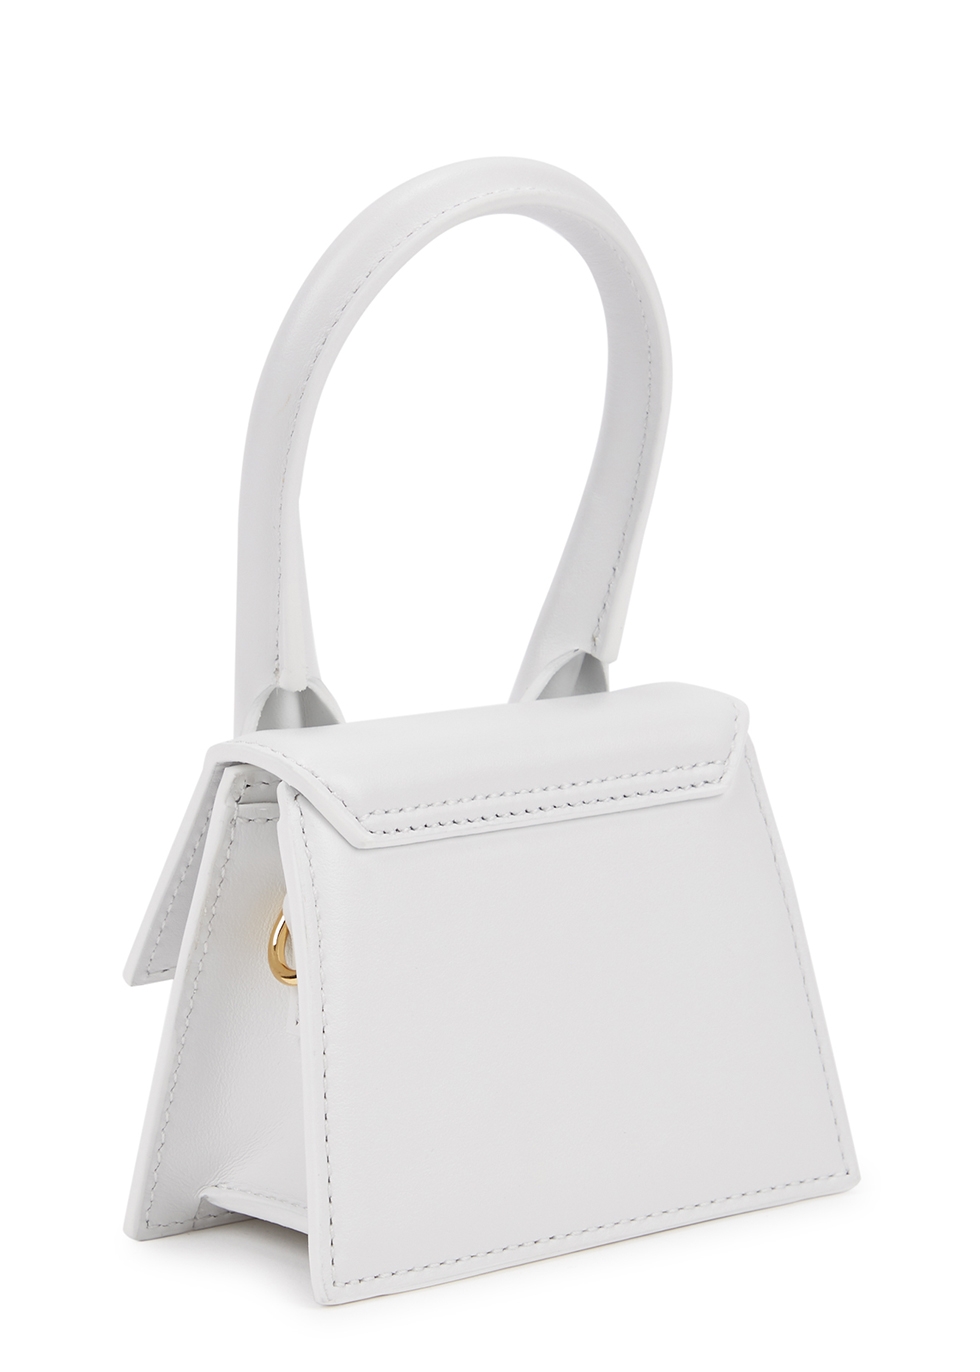 Save 51% Jacquemus Le Chiquito Leather Top-handle Bag in White Womens Bags Top-handle bags 